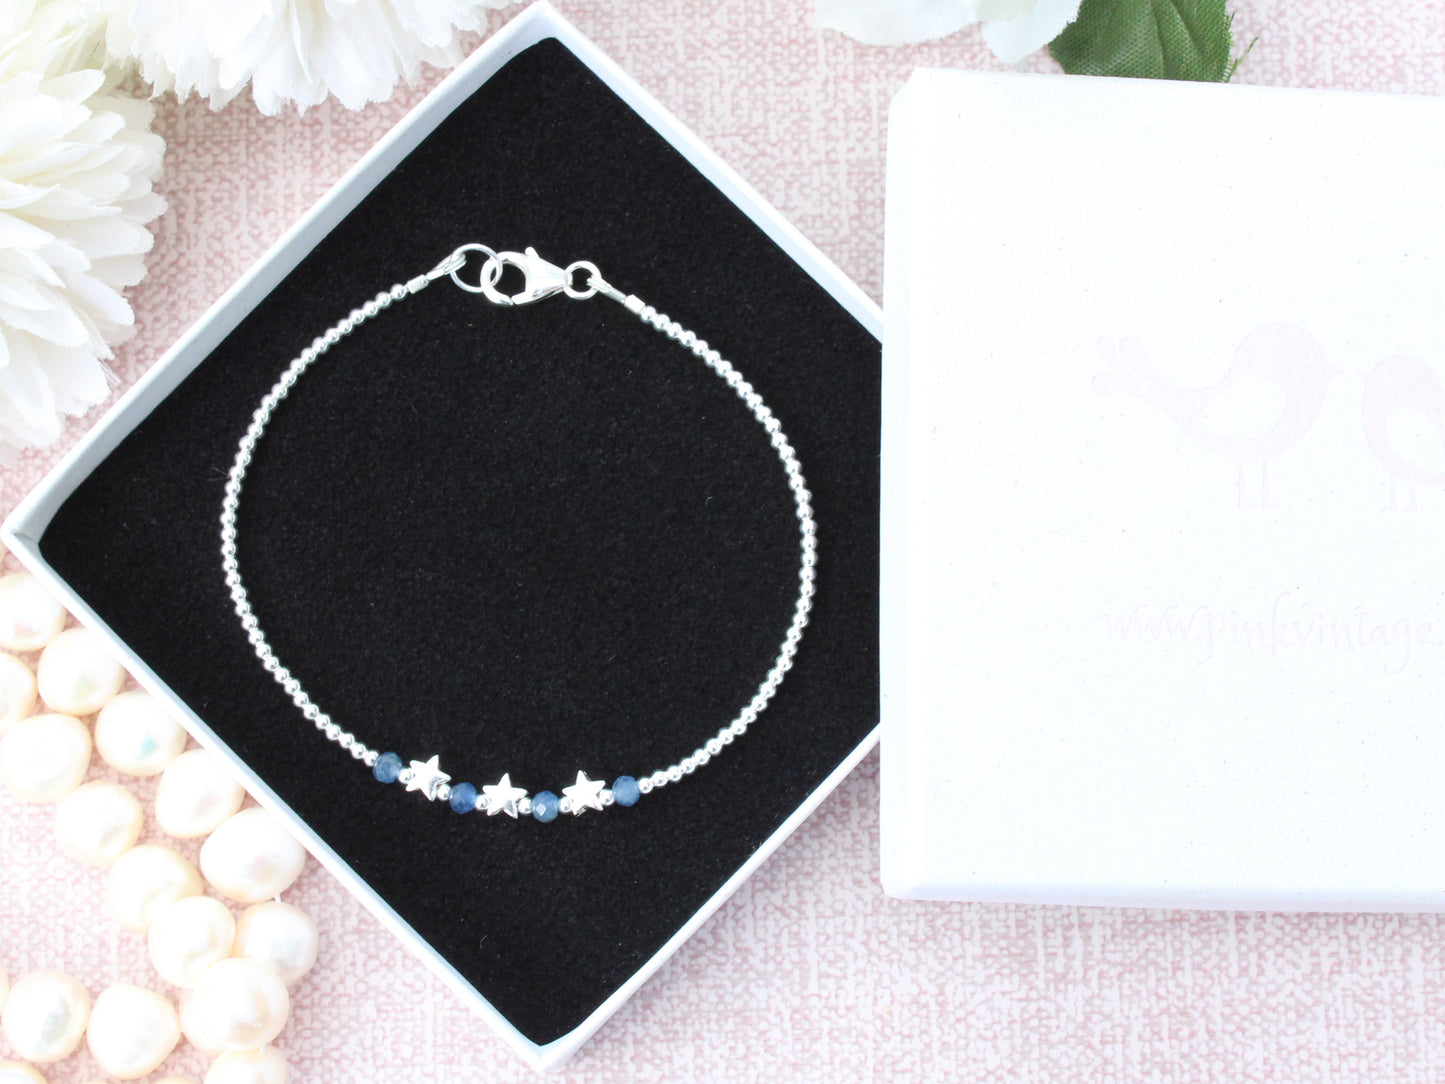 Sapphire bracelet sterling silver with optional personalised initial tag. September birthstone bracelet.